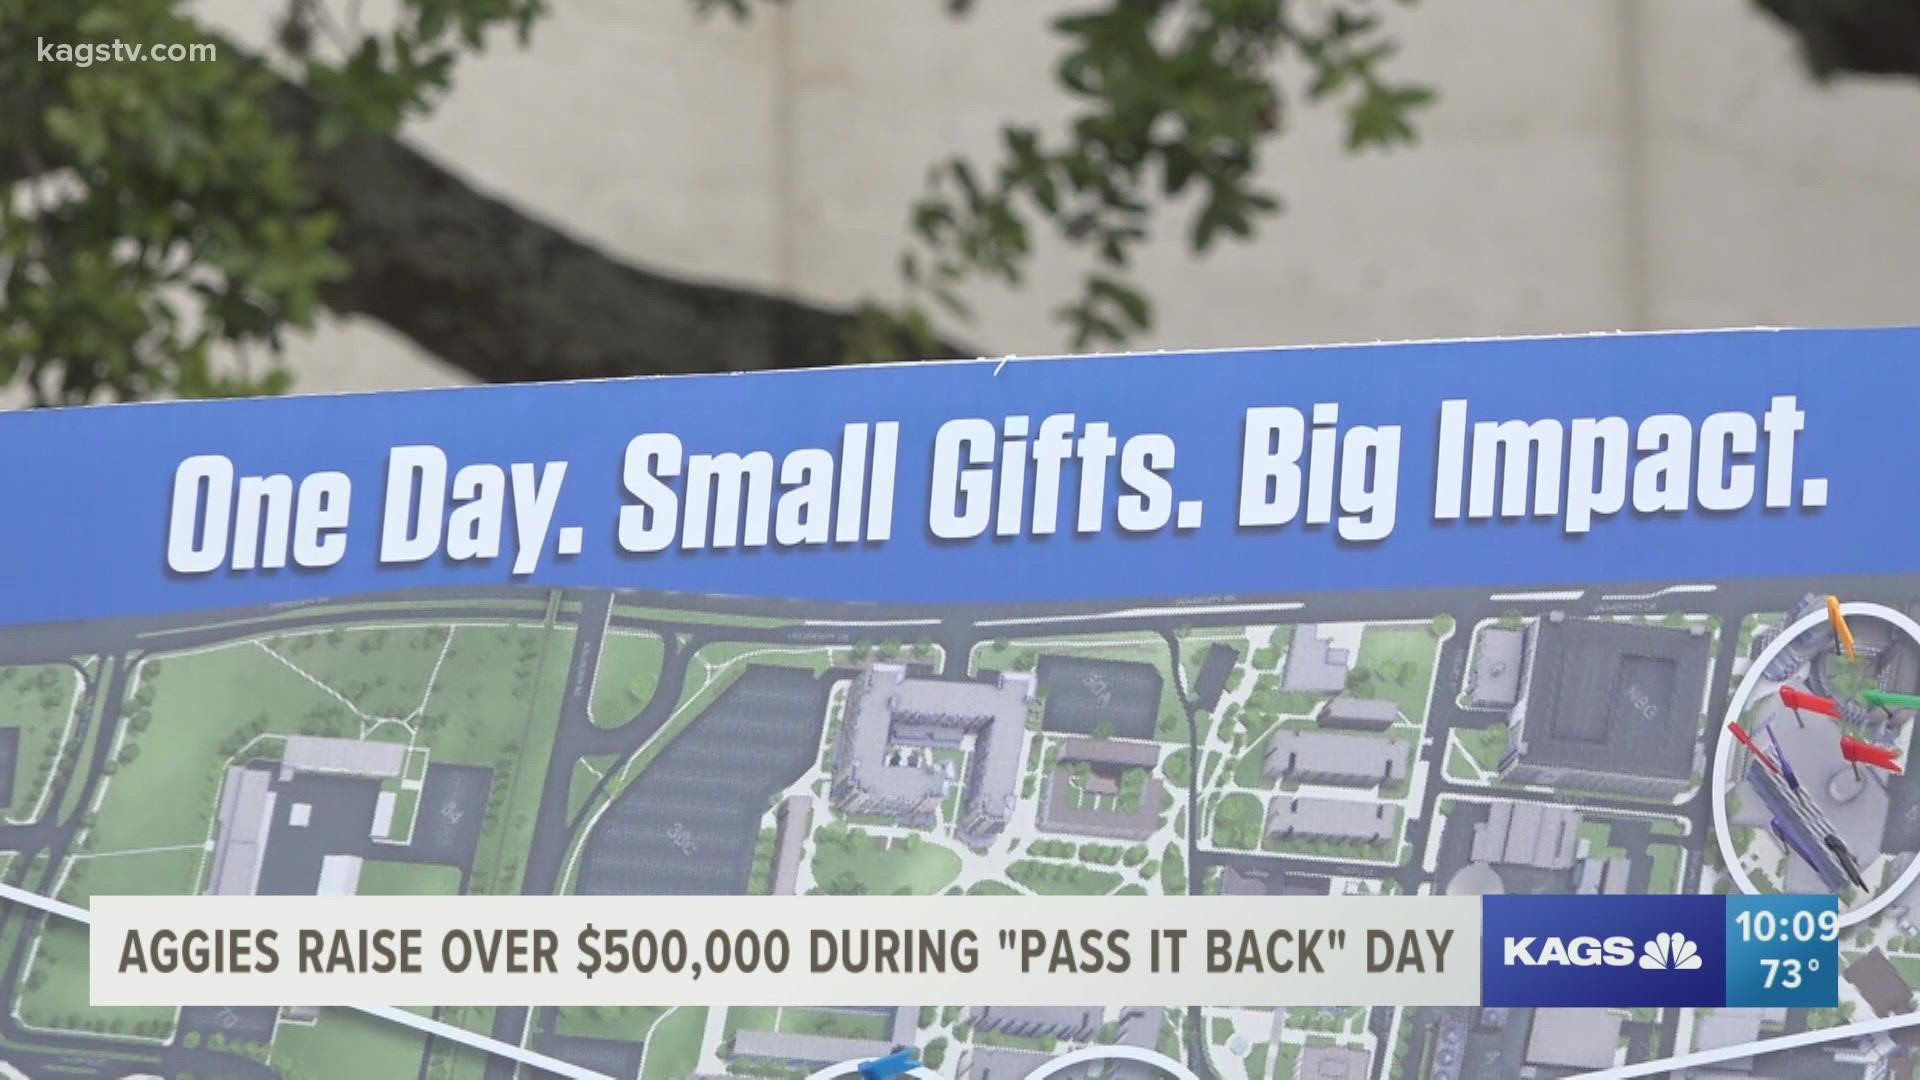 Pass It Back Day was created to help raise funds for all Texas A&M students and traditions